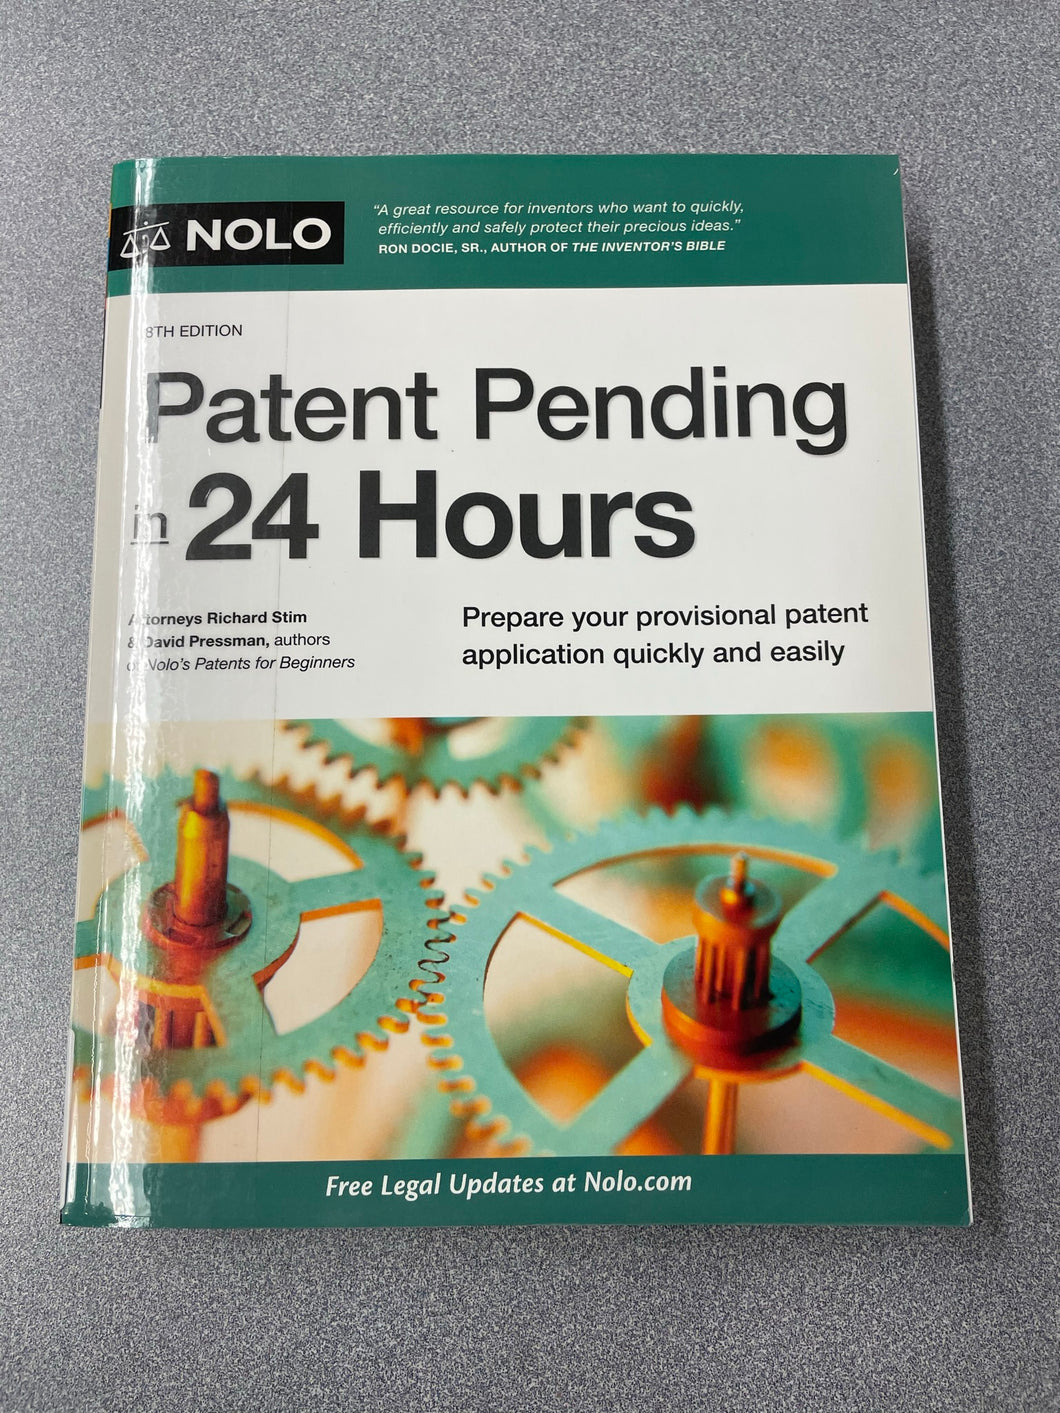 Patent Pending in 24 Hours: Prepare Your Provisional Patent Application Quickly and Easily, 8th Edition,  Stim, Richard and David Pressman, [2019] LAW 10/22